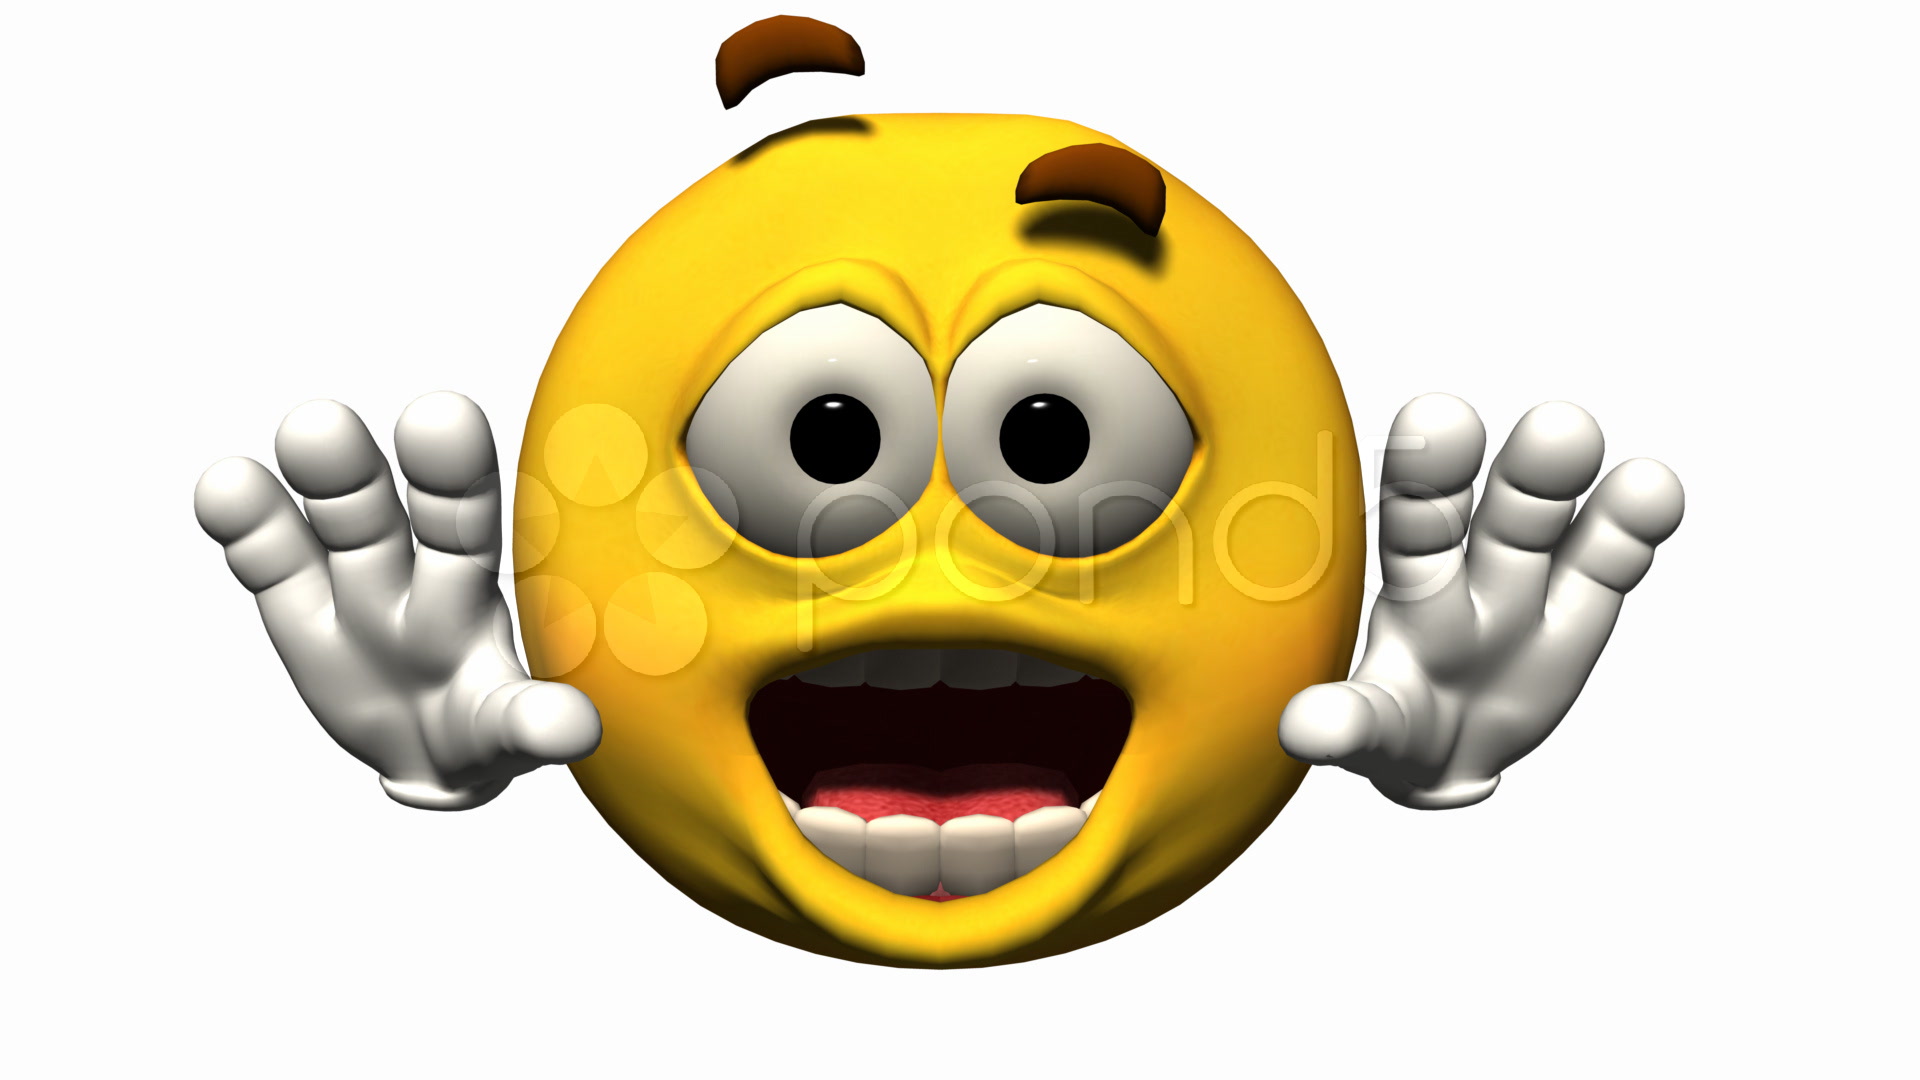 3D Animated Emoticons Same Time